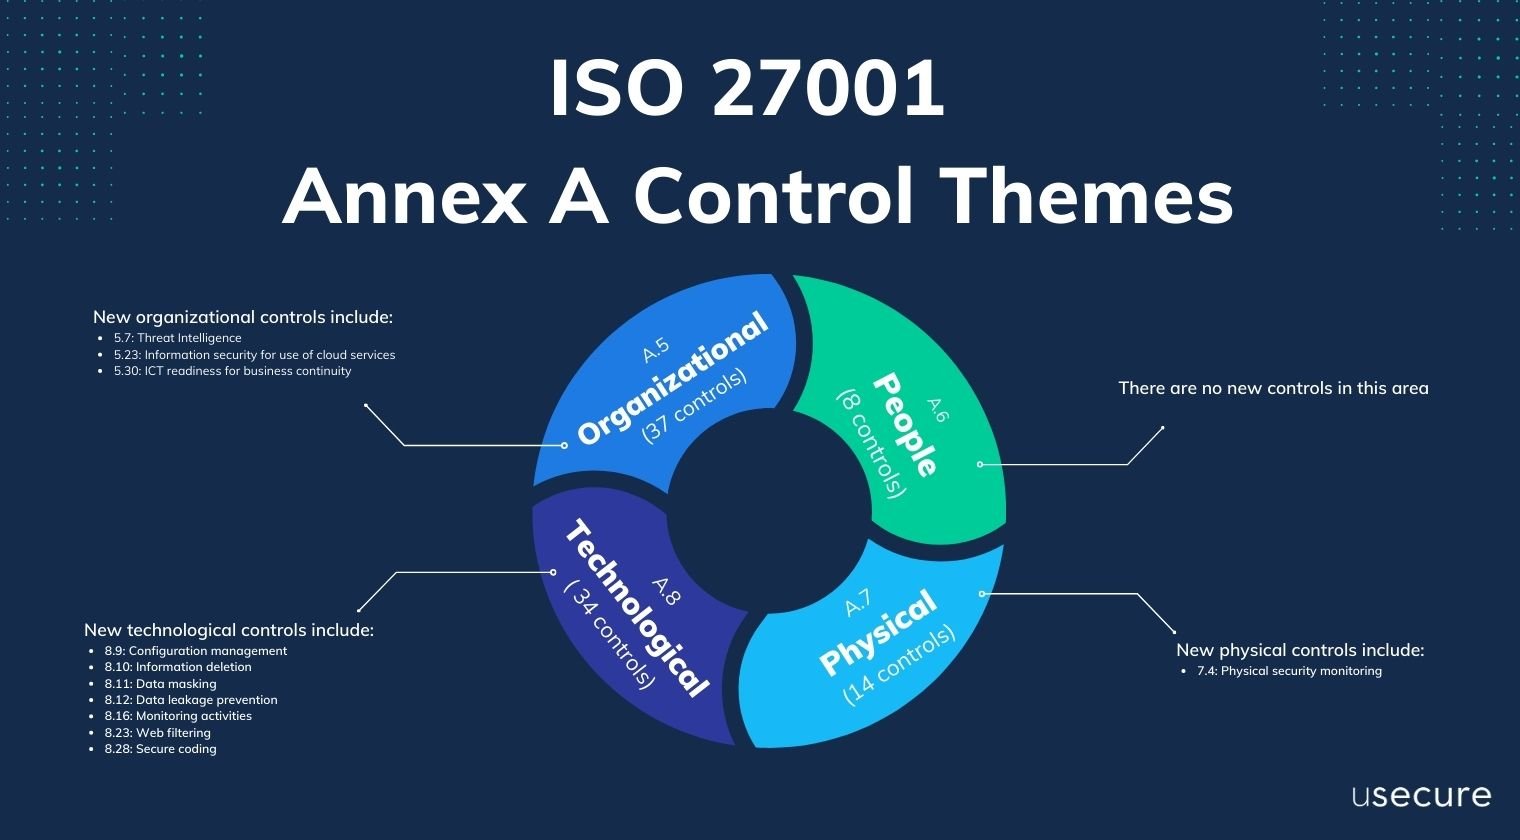 ISO 27001 Annex A Control Themes